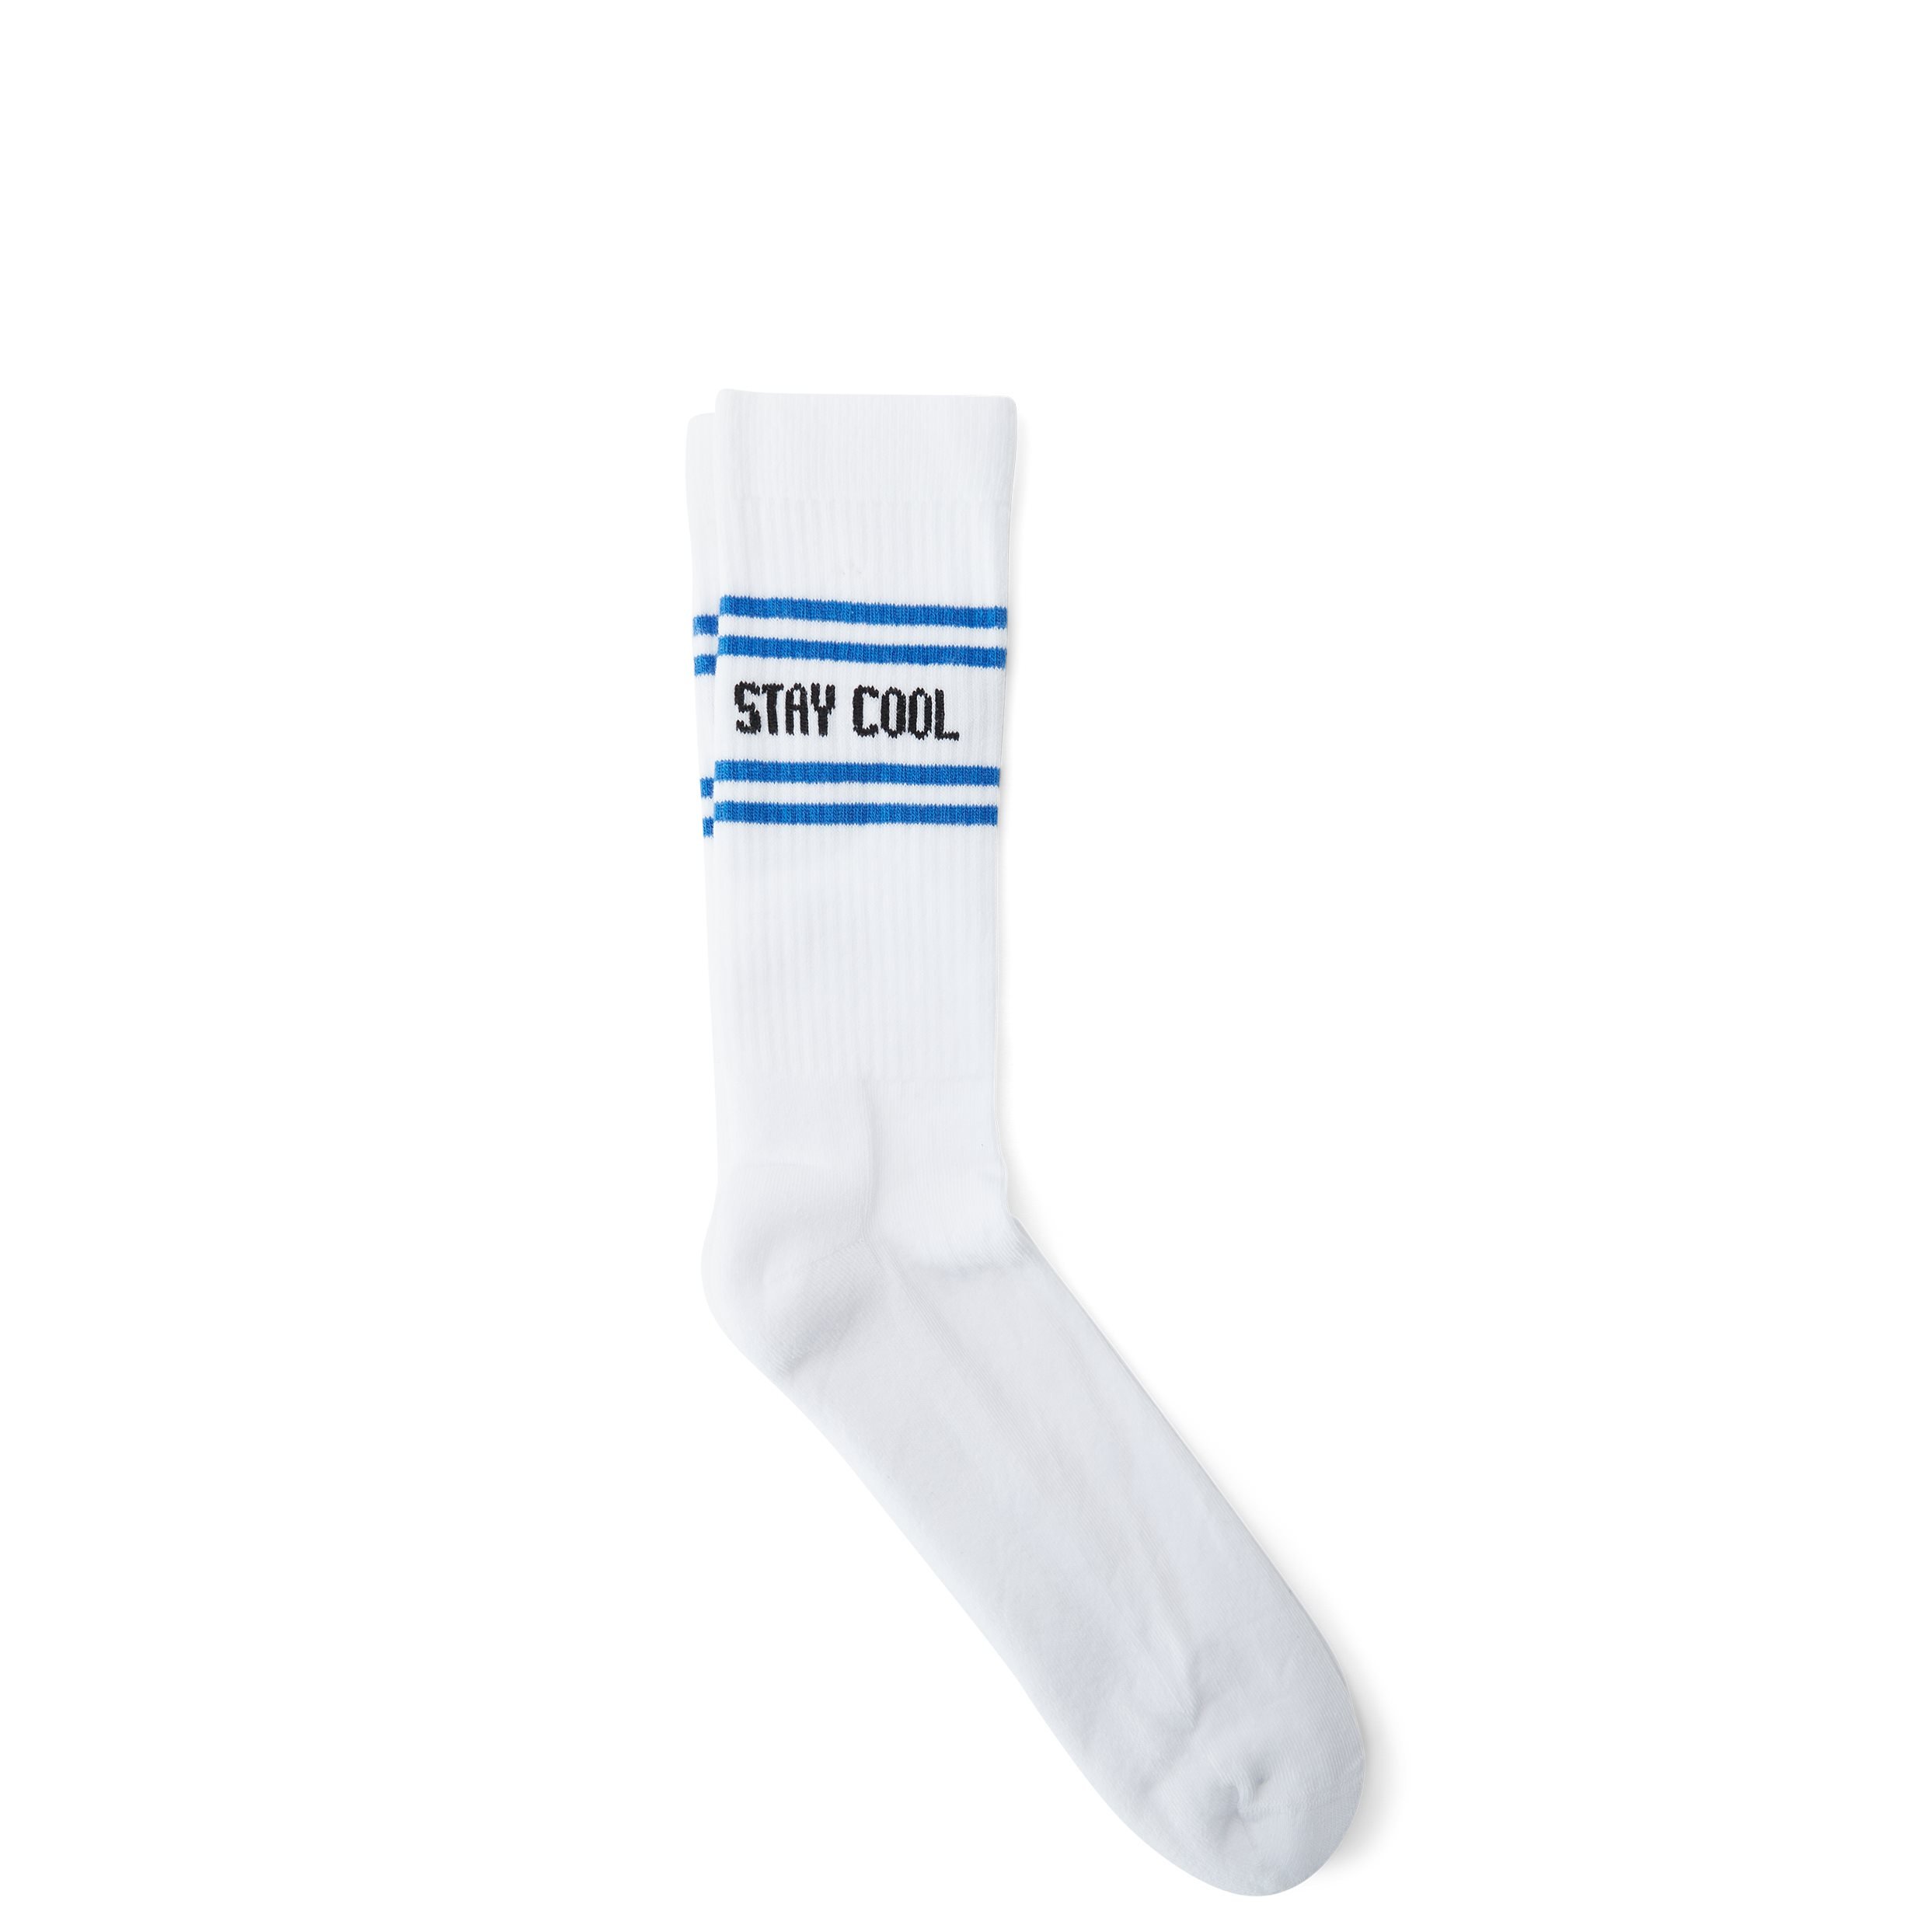 qUINT Socks STAY COOL 115-12527 White